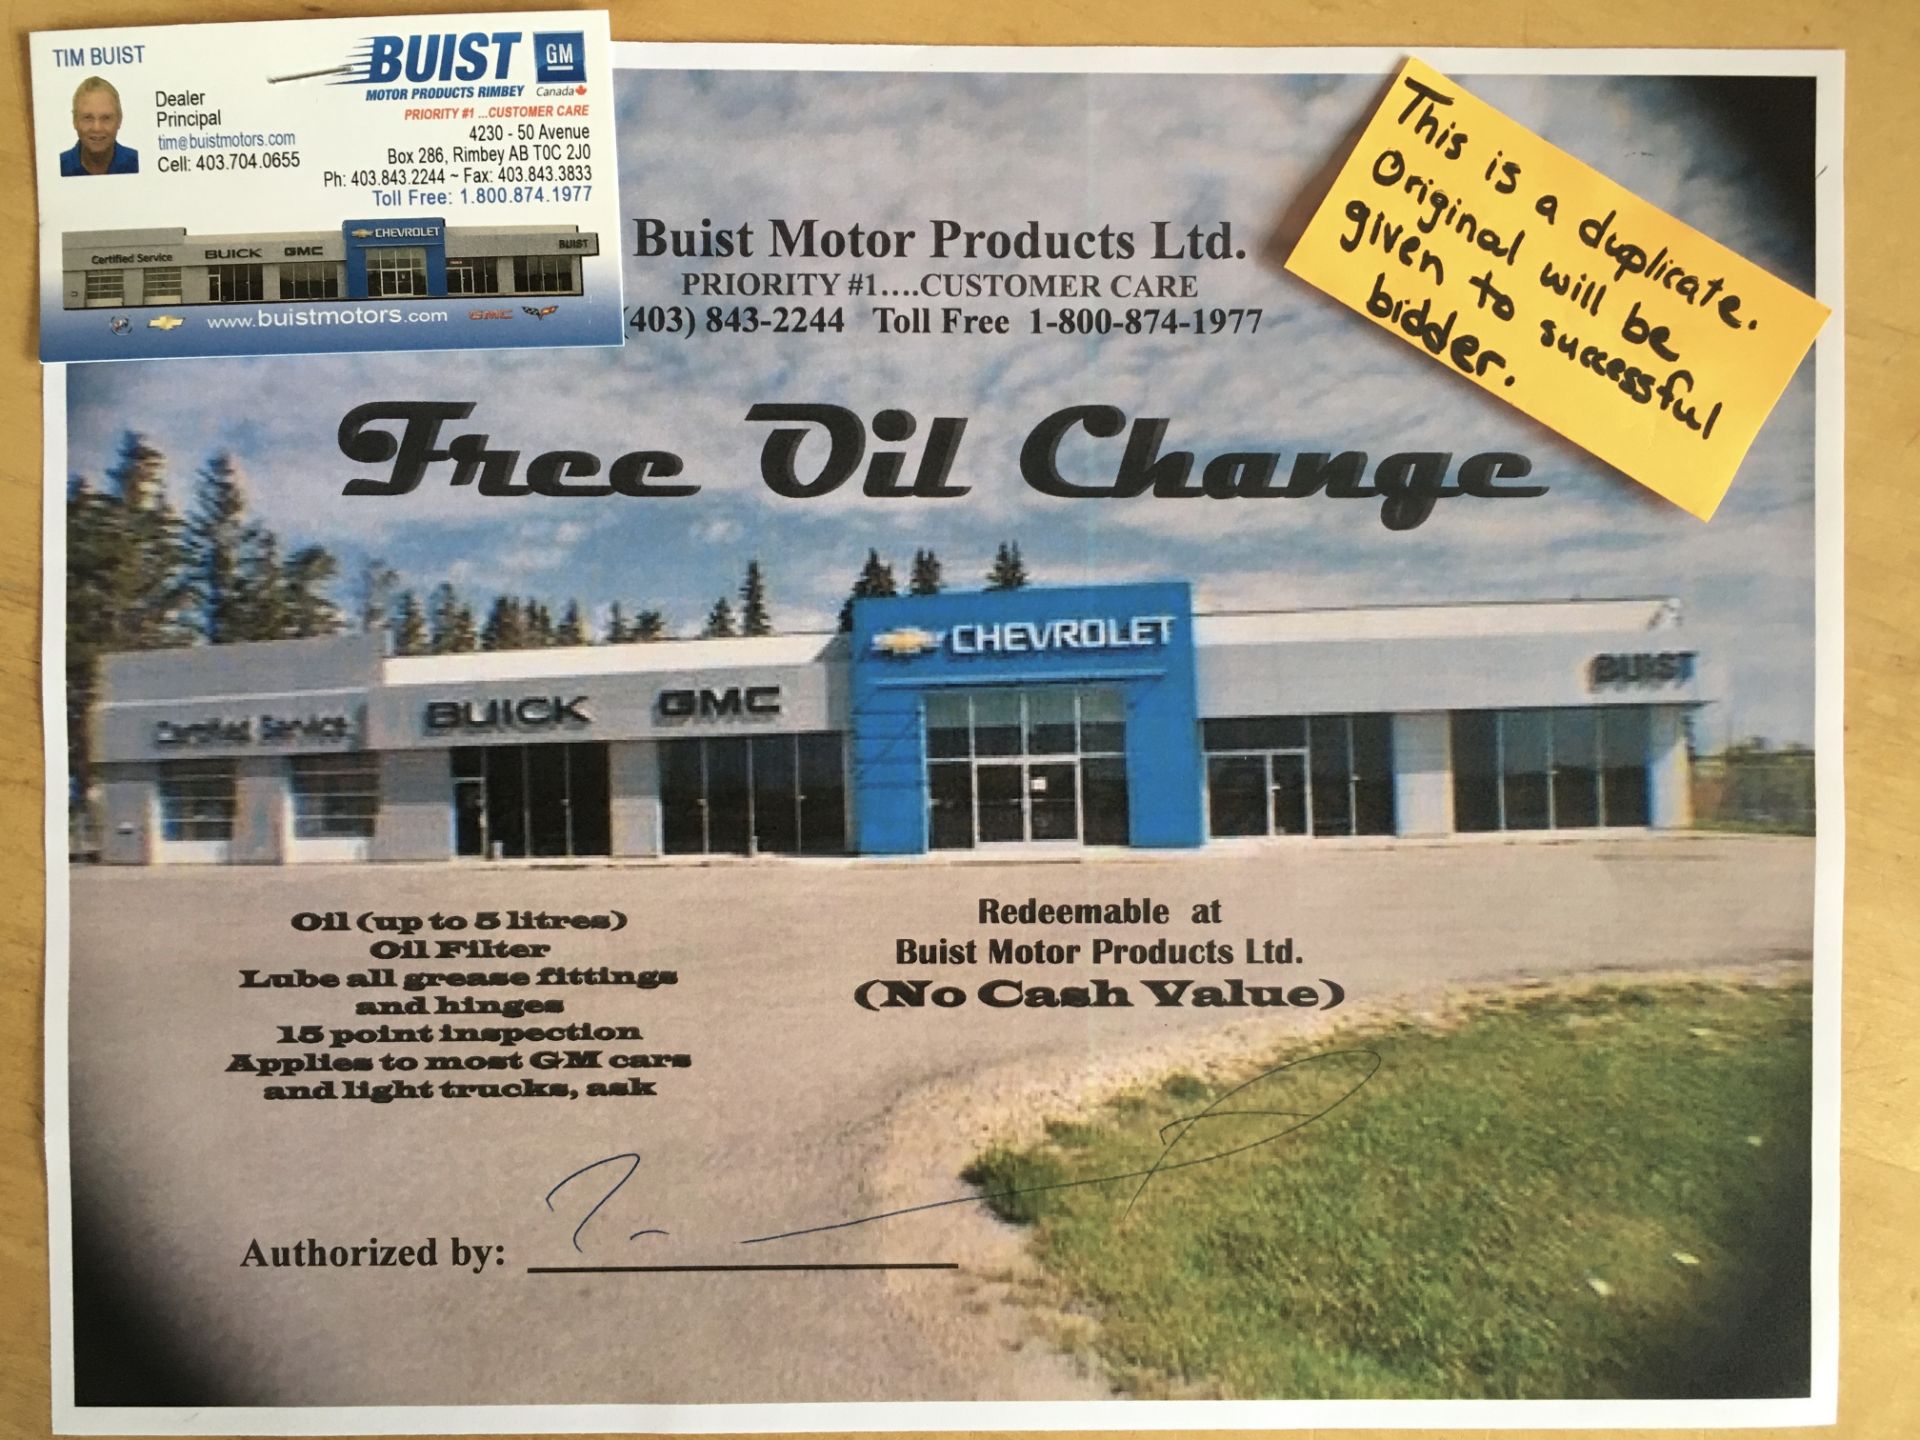 GIFT CERTIFICATE FOR A FREE OIL CHANGE Redeemable at Buist Motors Products Ltd. Oil change